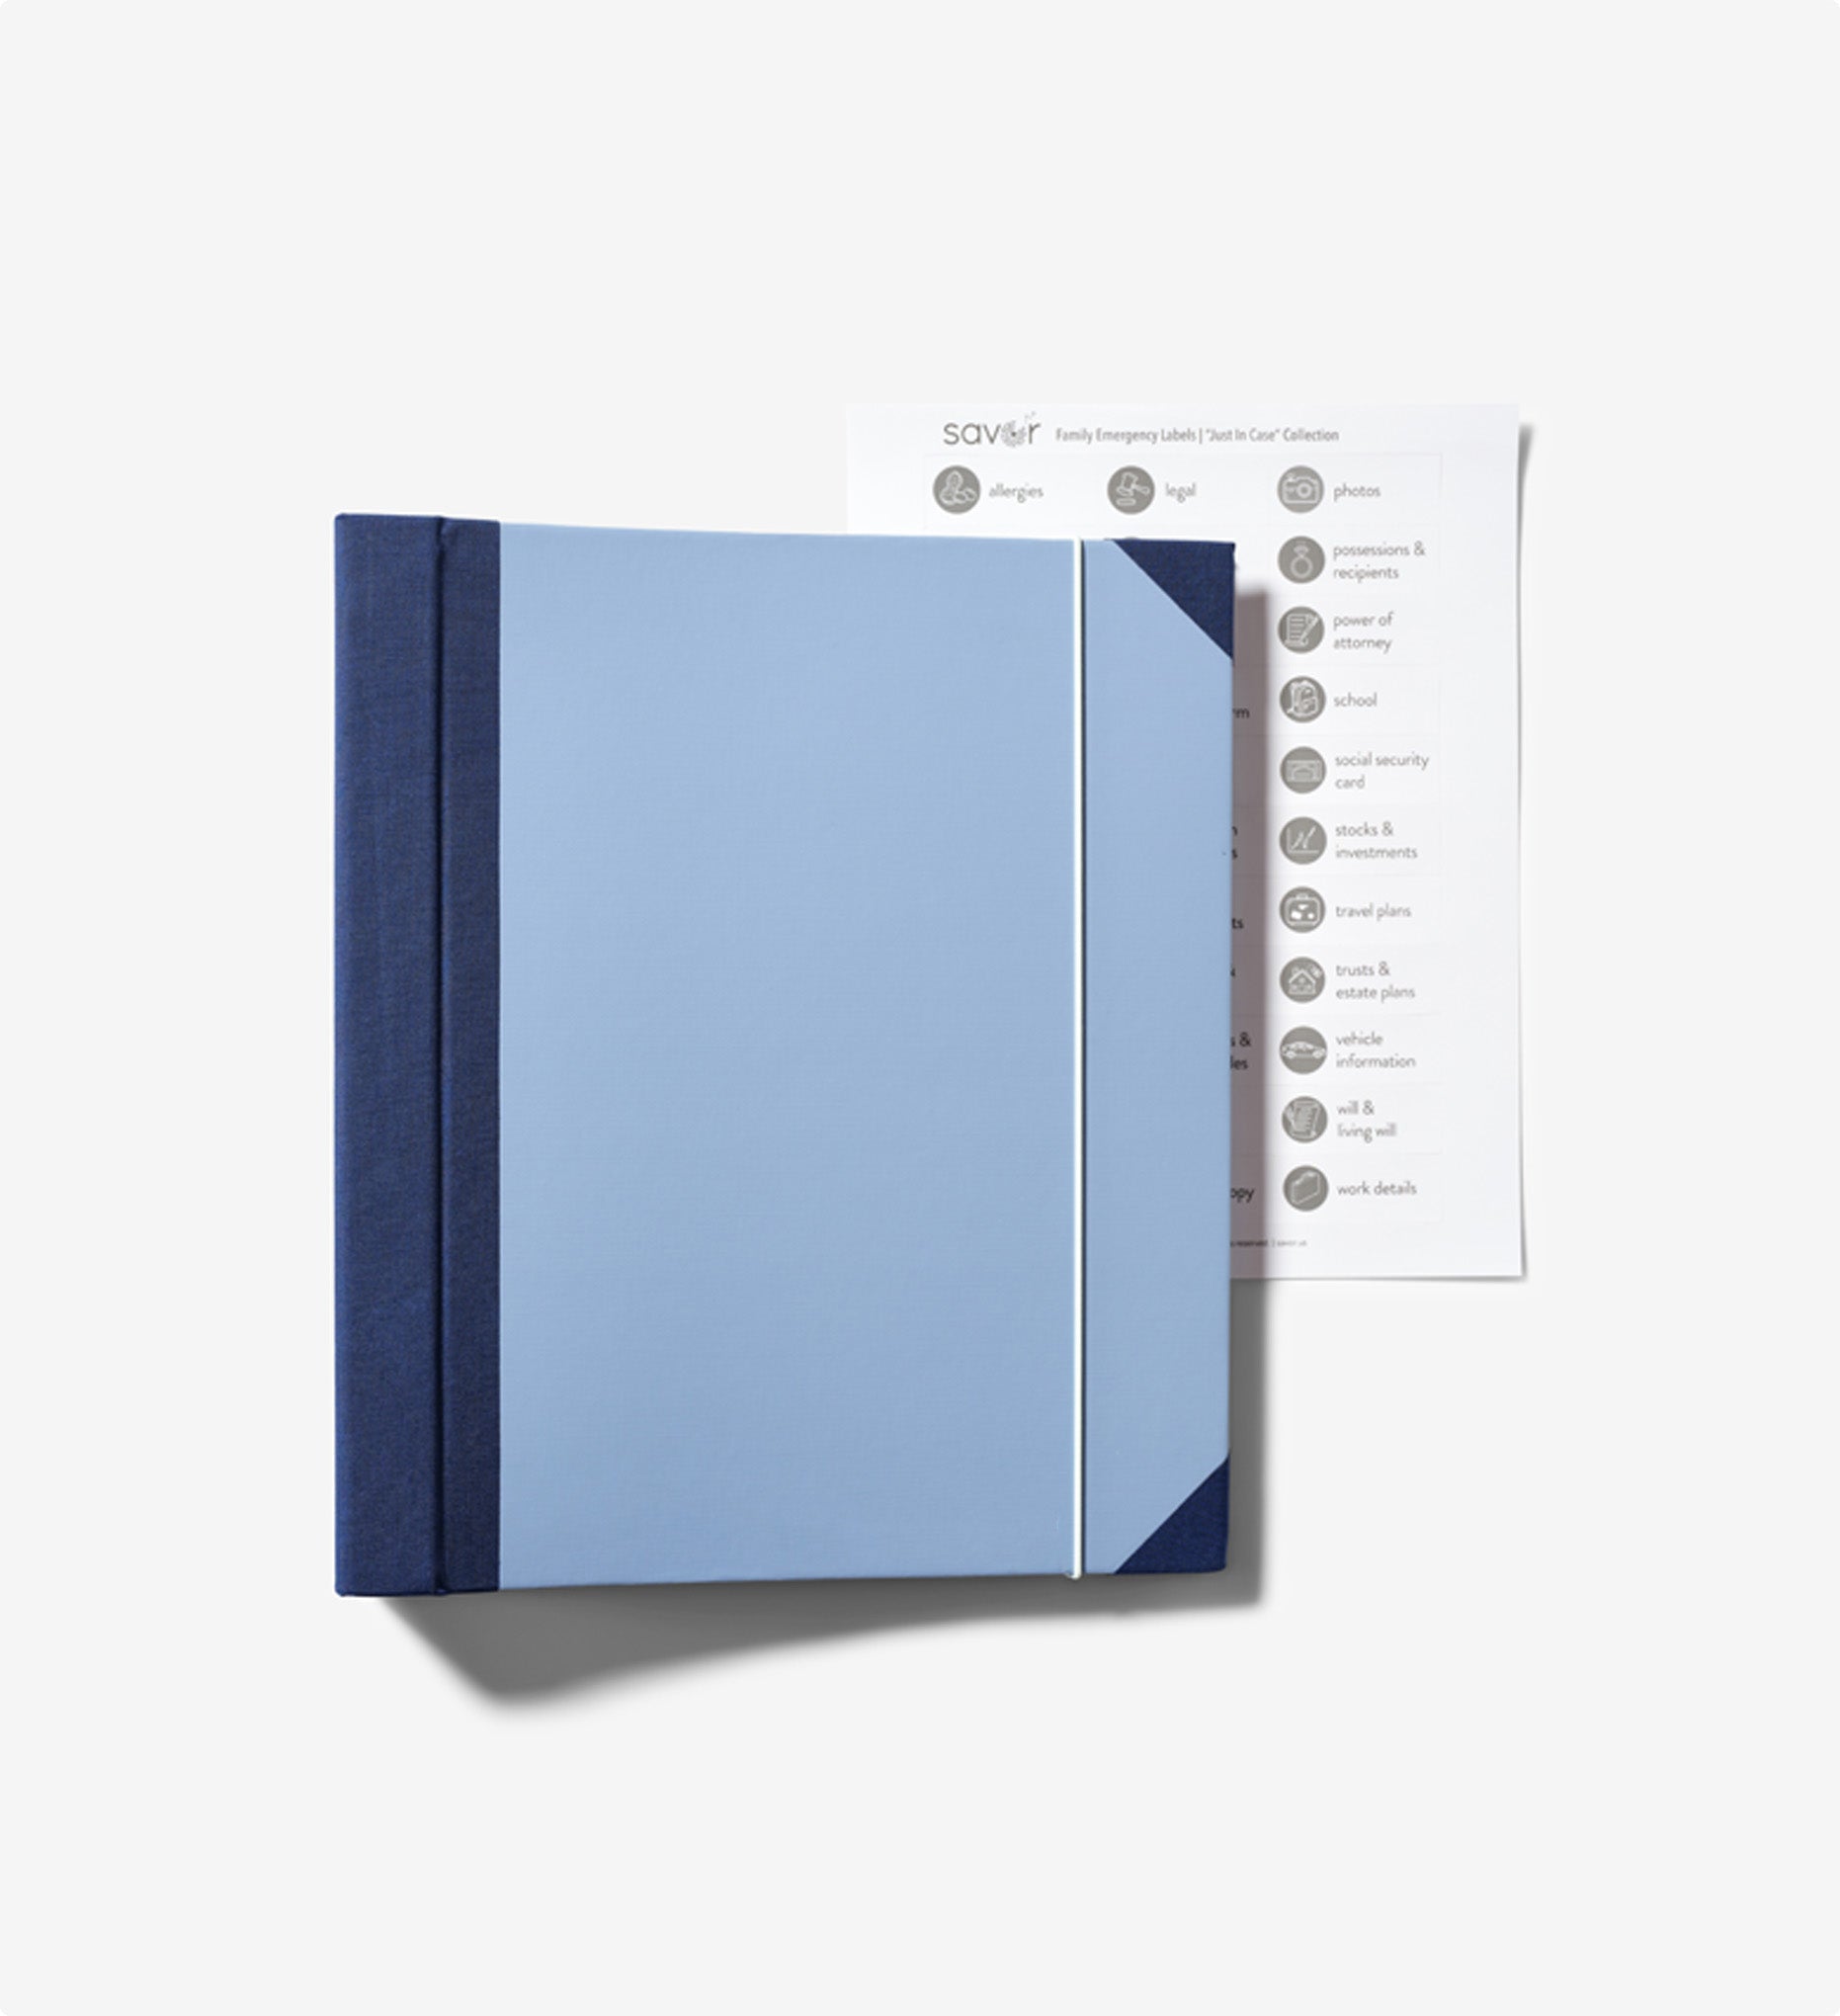 Buy Moleskine Folio Plain Pad A4 With Free Delivery